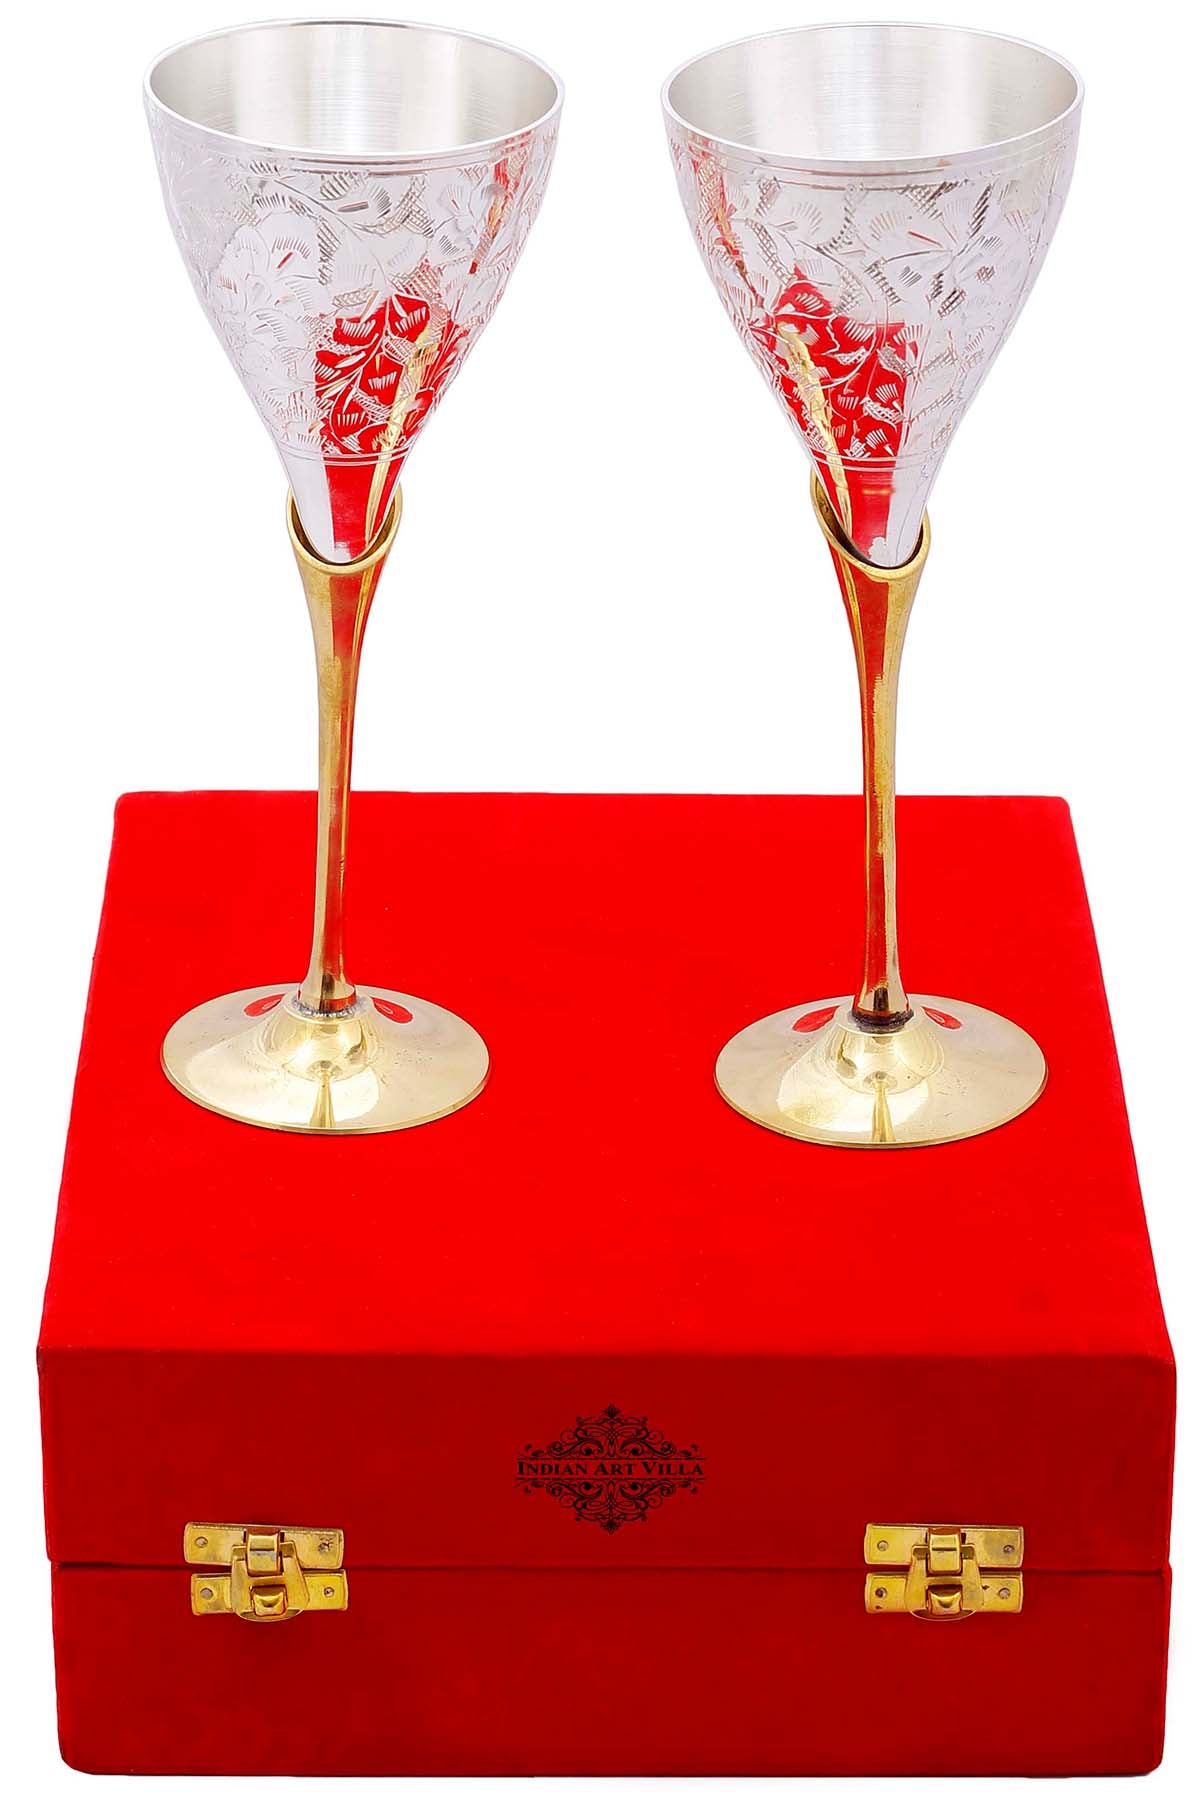 Buy Indian Art Villa Pure Set of 2 Silver Plated & Brass Champagne Engraved Wine  Glass With Red Box Online - Indian Art Villa